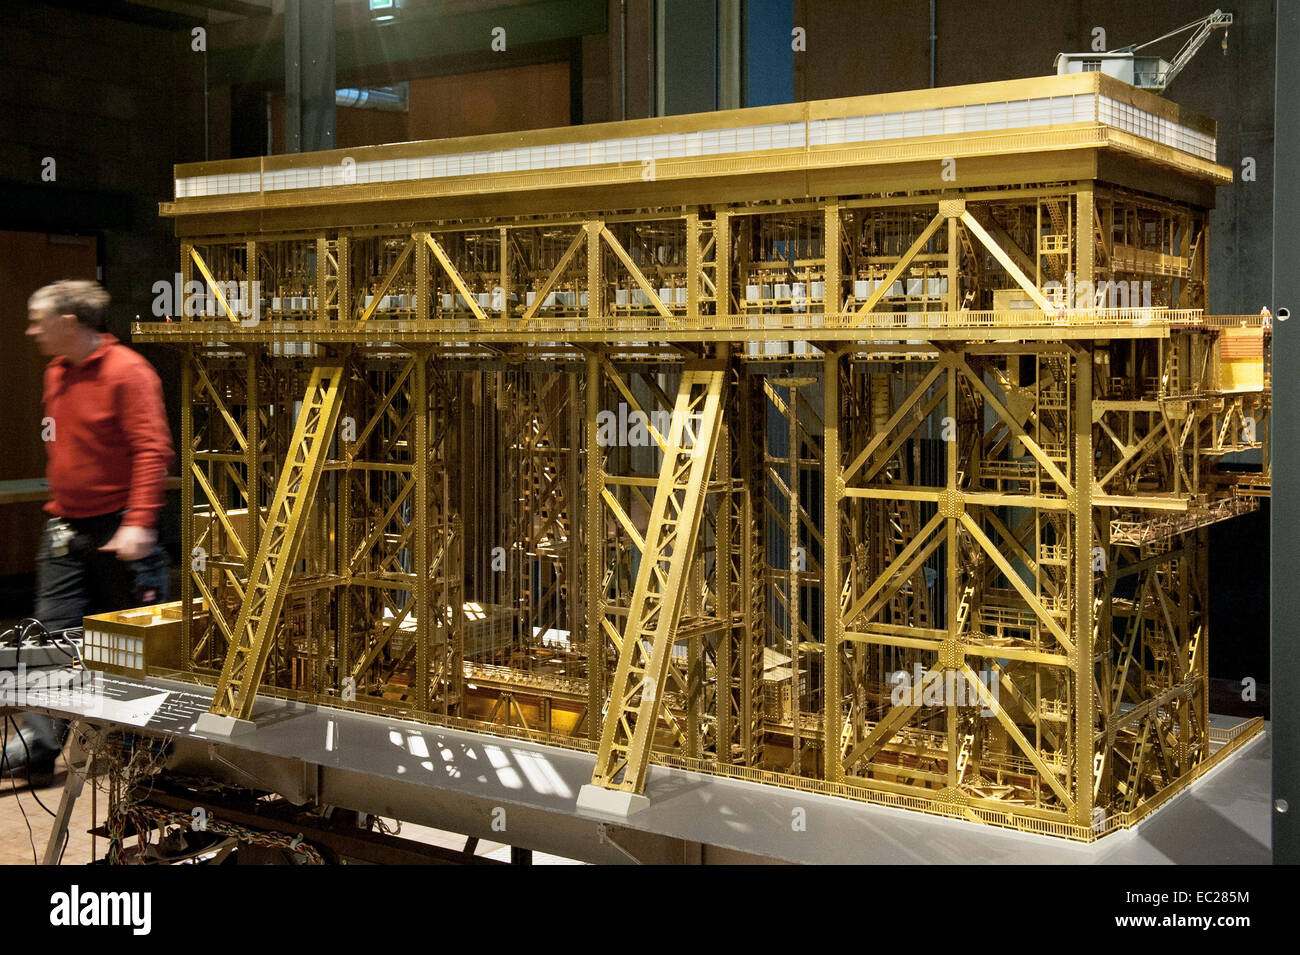 A model replication of the boat lift in Niederfinow, on a scale of 1:50, is on display at the Museum of Technology in Berlin, Germany, 8 December 2014. The model measures three metres by 1,20 metres and was built by four volunteer model makers over a period of 20 years, the museum stated on Monday, 8 December 2014. PHOTO: FELIX ZAHN/dpa Stock Photo